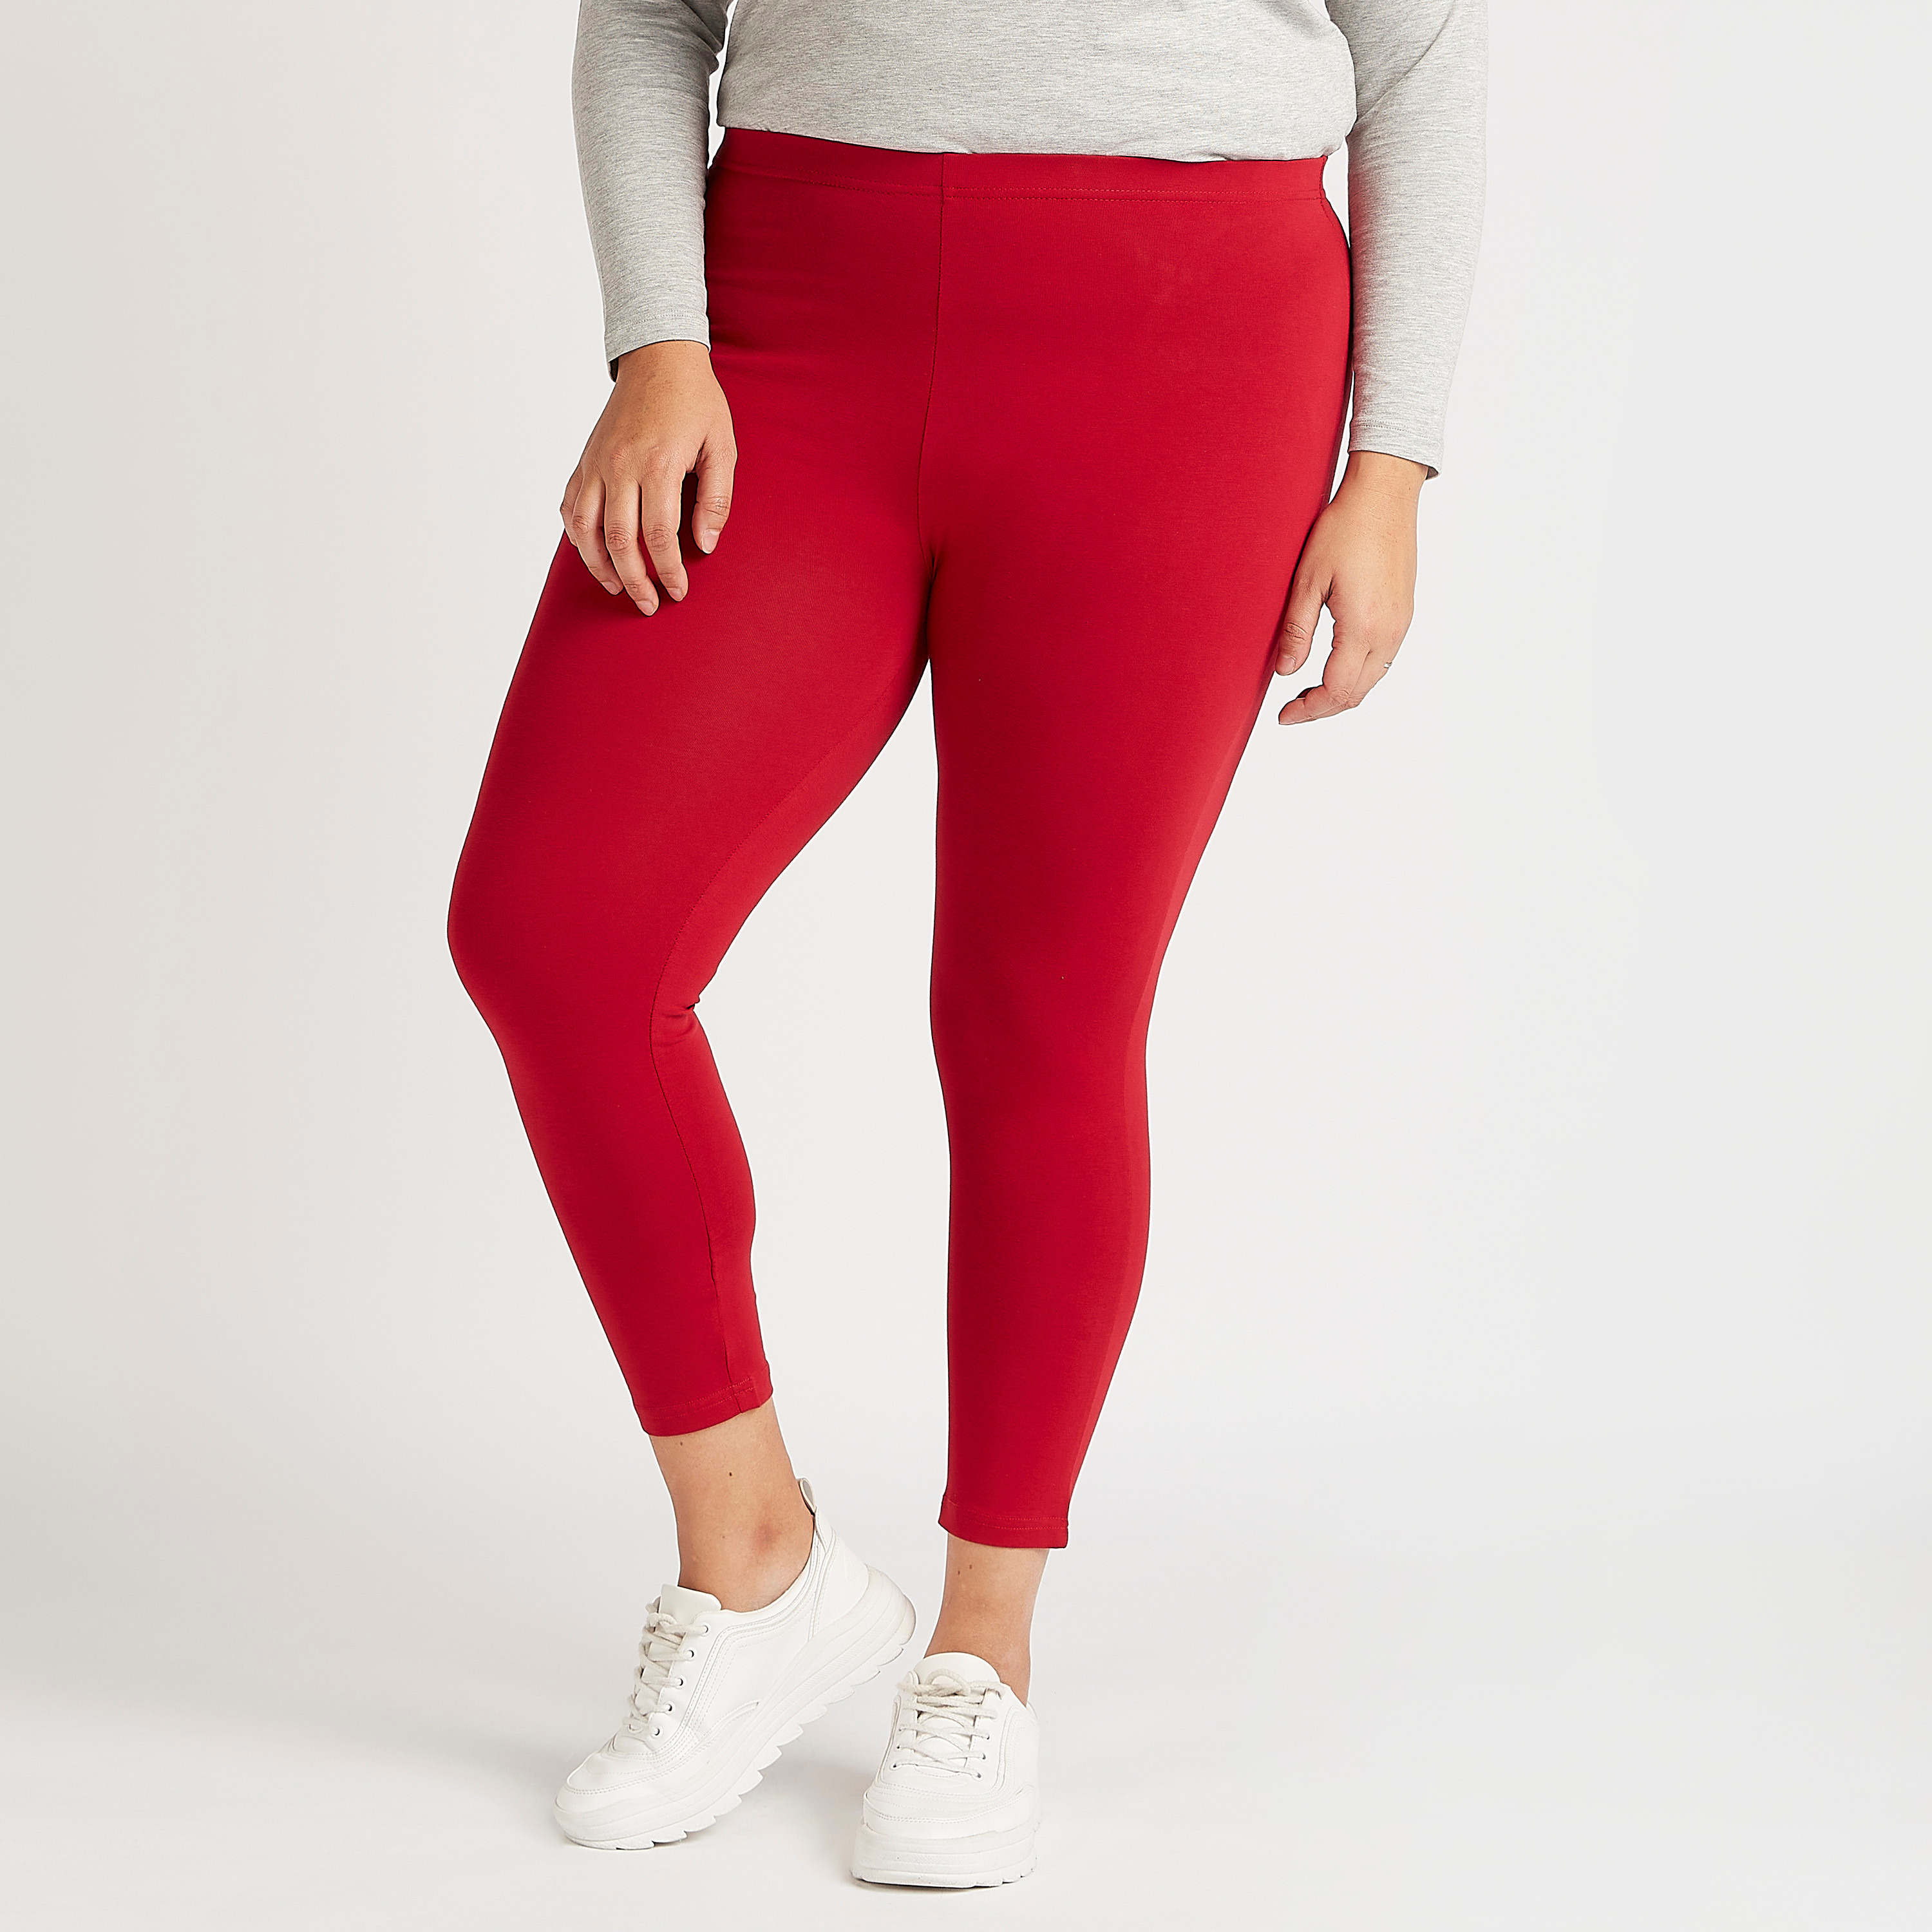 Buy Red Leggings for Women by TAG 7 Online | Ajio.com